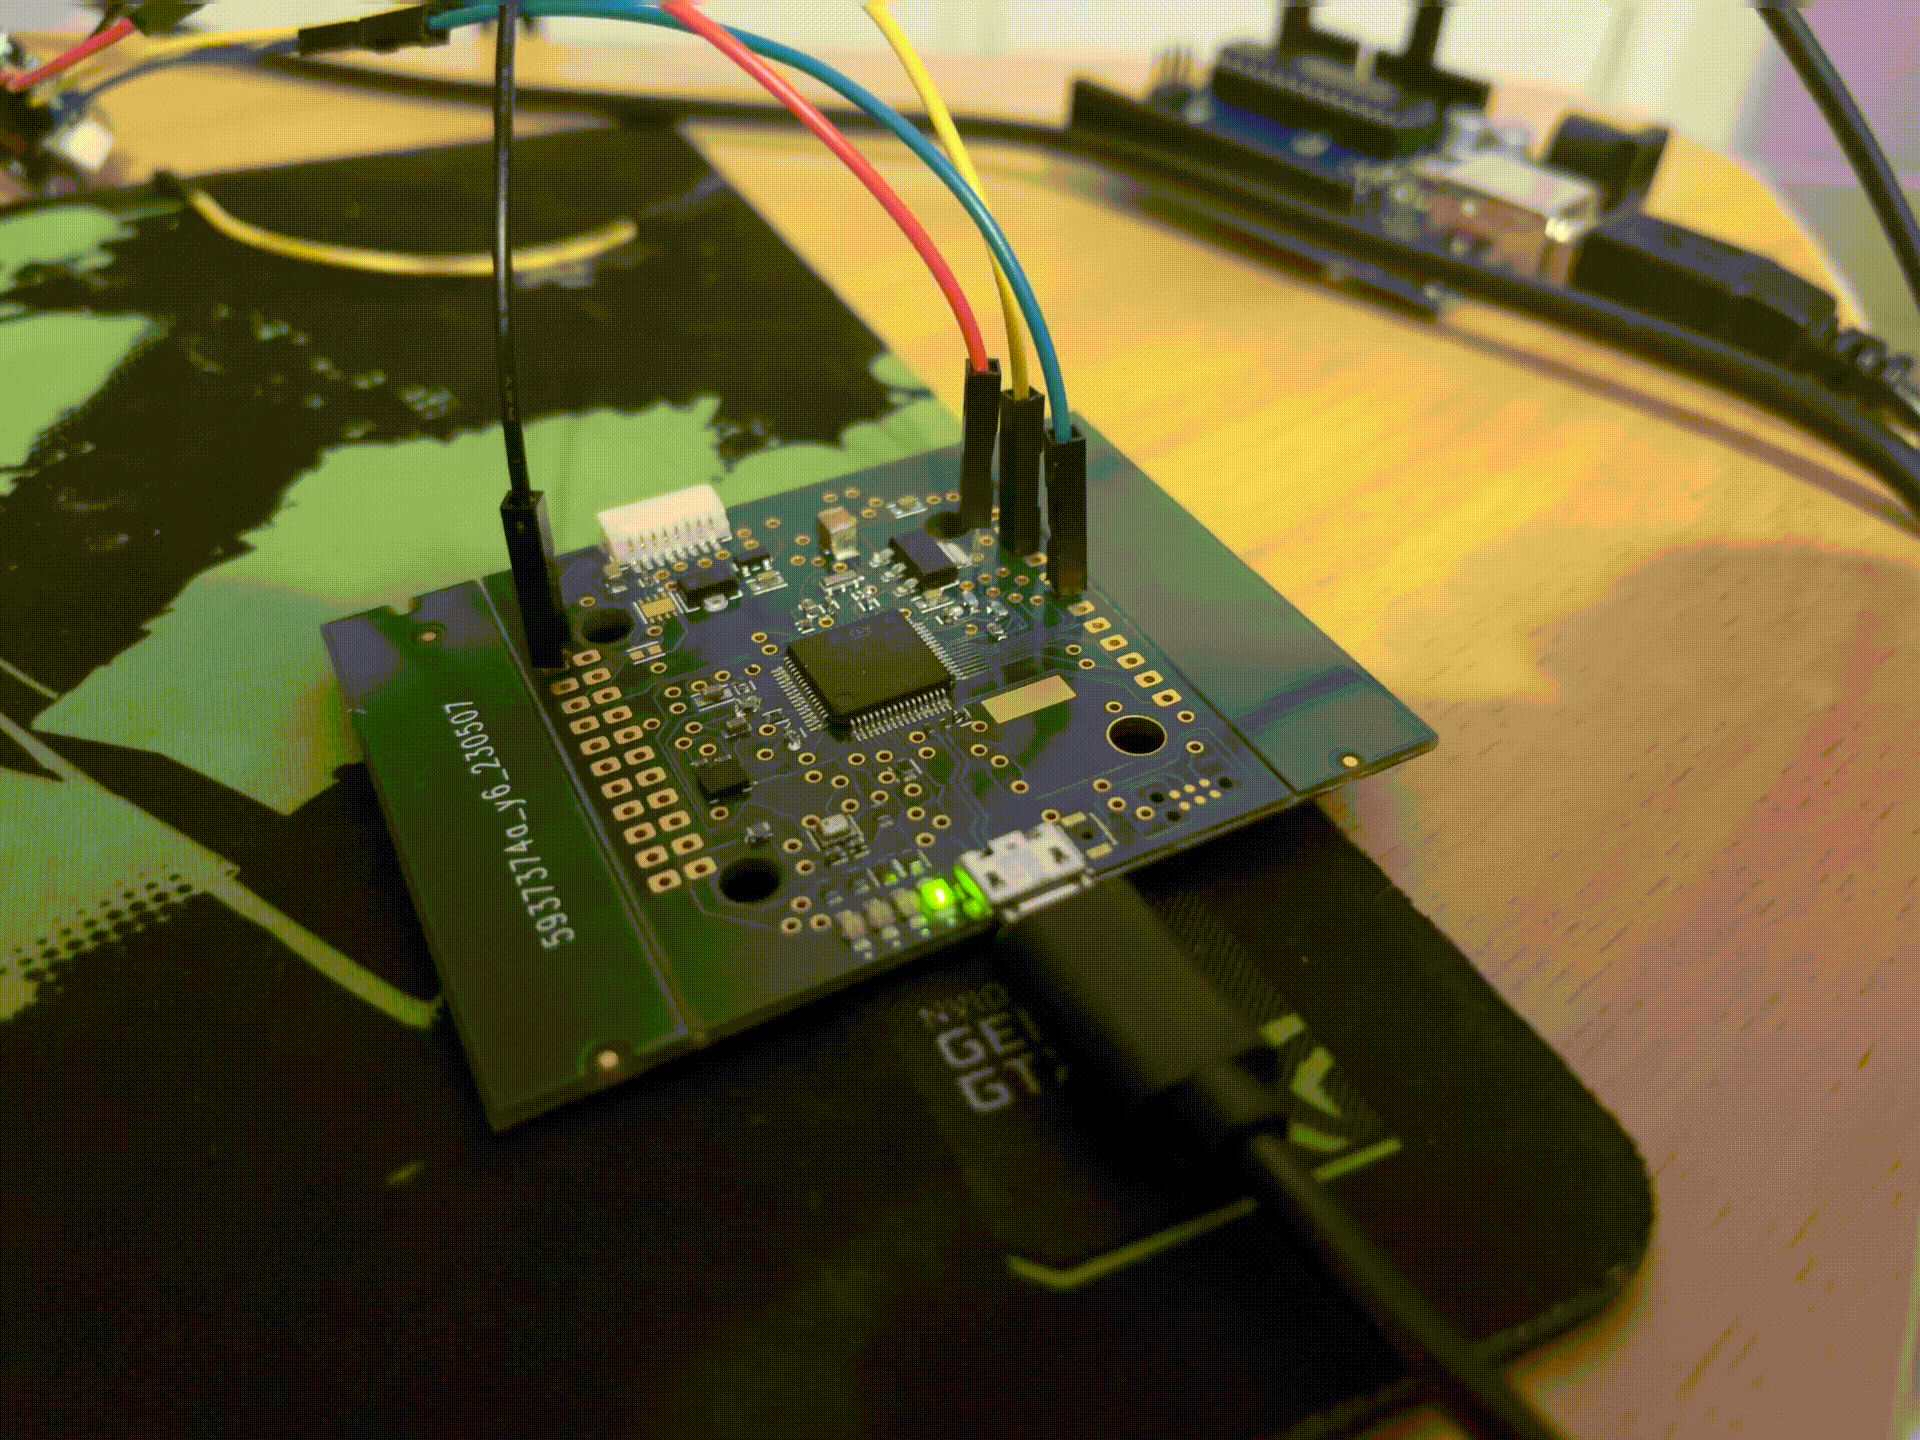 gif of flight controller powered up and running code